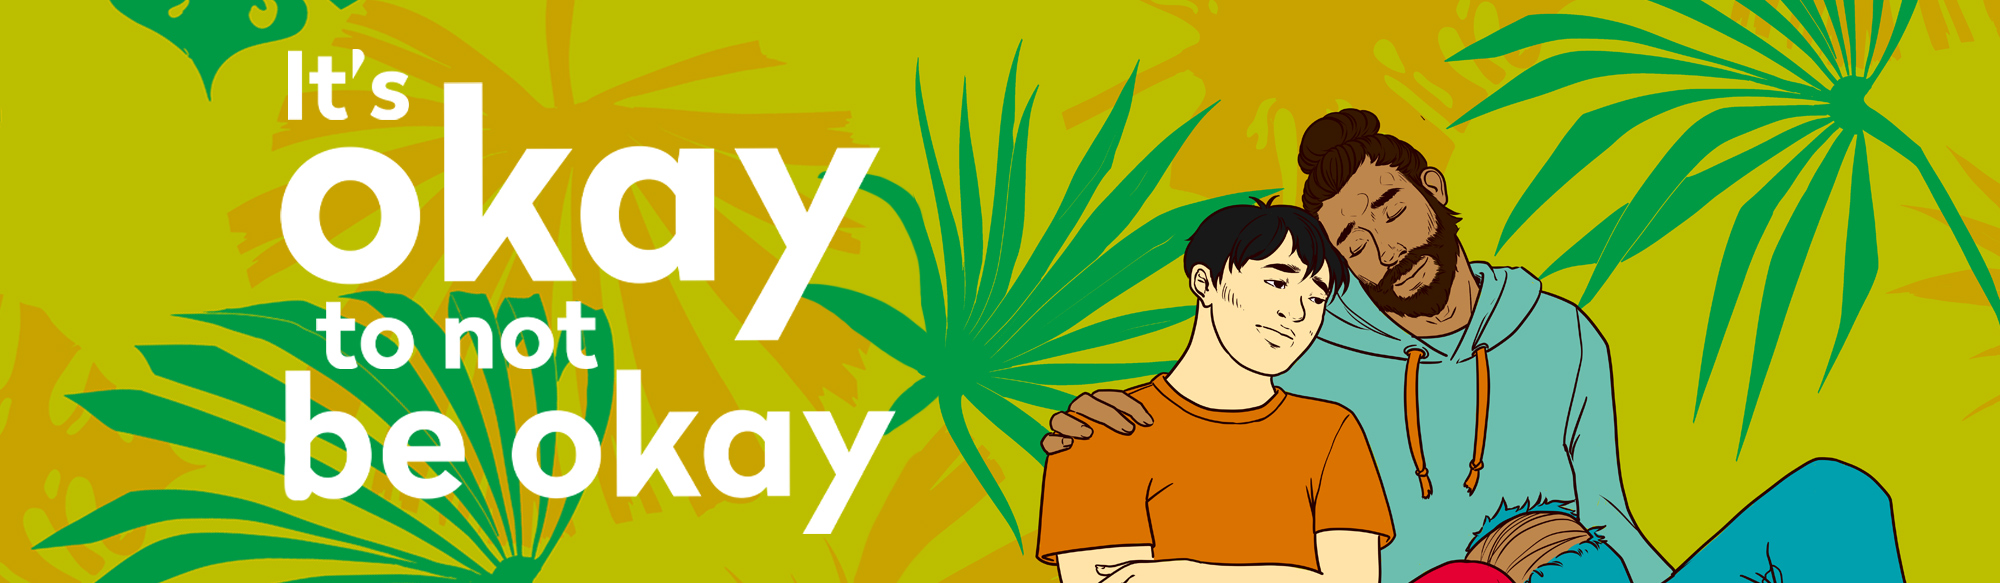 Graphic of two men embracing with the text "it's okay to not be okay" with green and brown leaves around.